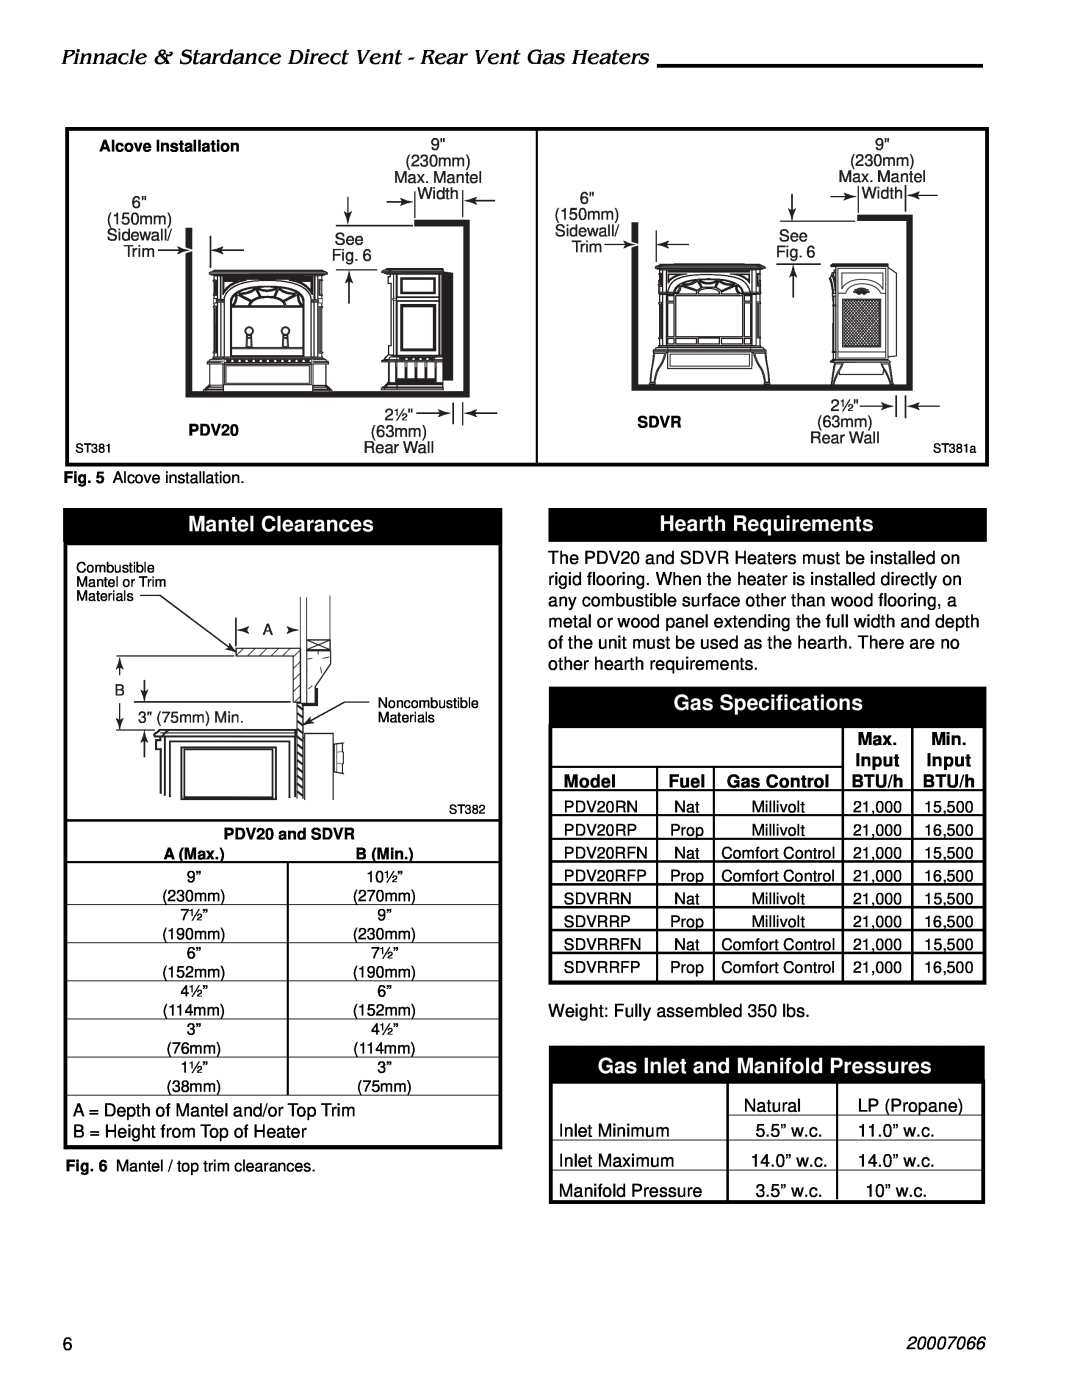 Vermont Casting 4065, SDVR Mantel Clearances, Hearth Requirements, Gas Specifications, Gas Inlet and Manifold Pressures 